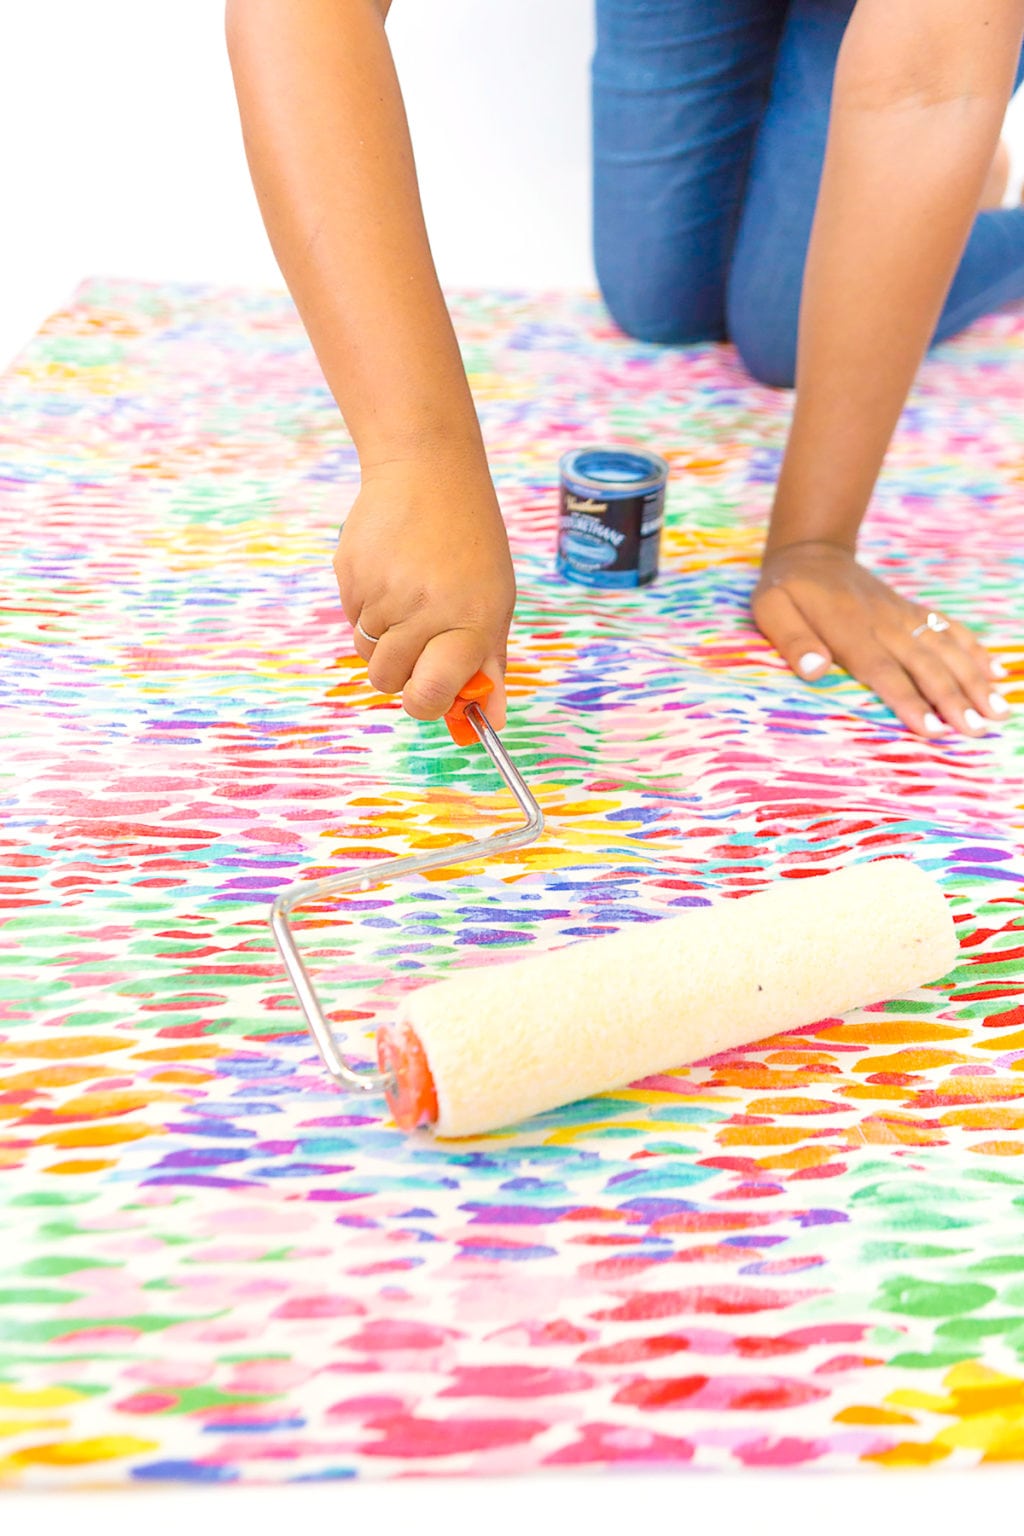 Large area rugs can be pricey! Follow this tutorial on how to turn a regular piece of fabric into a DIY Mod Podge Fabric Rug. It's totally customizable and afforable. 